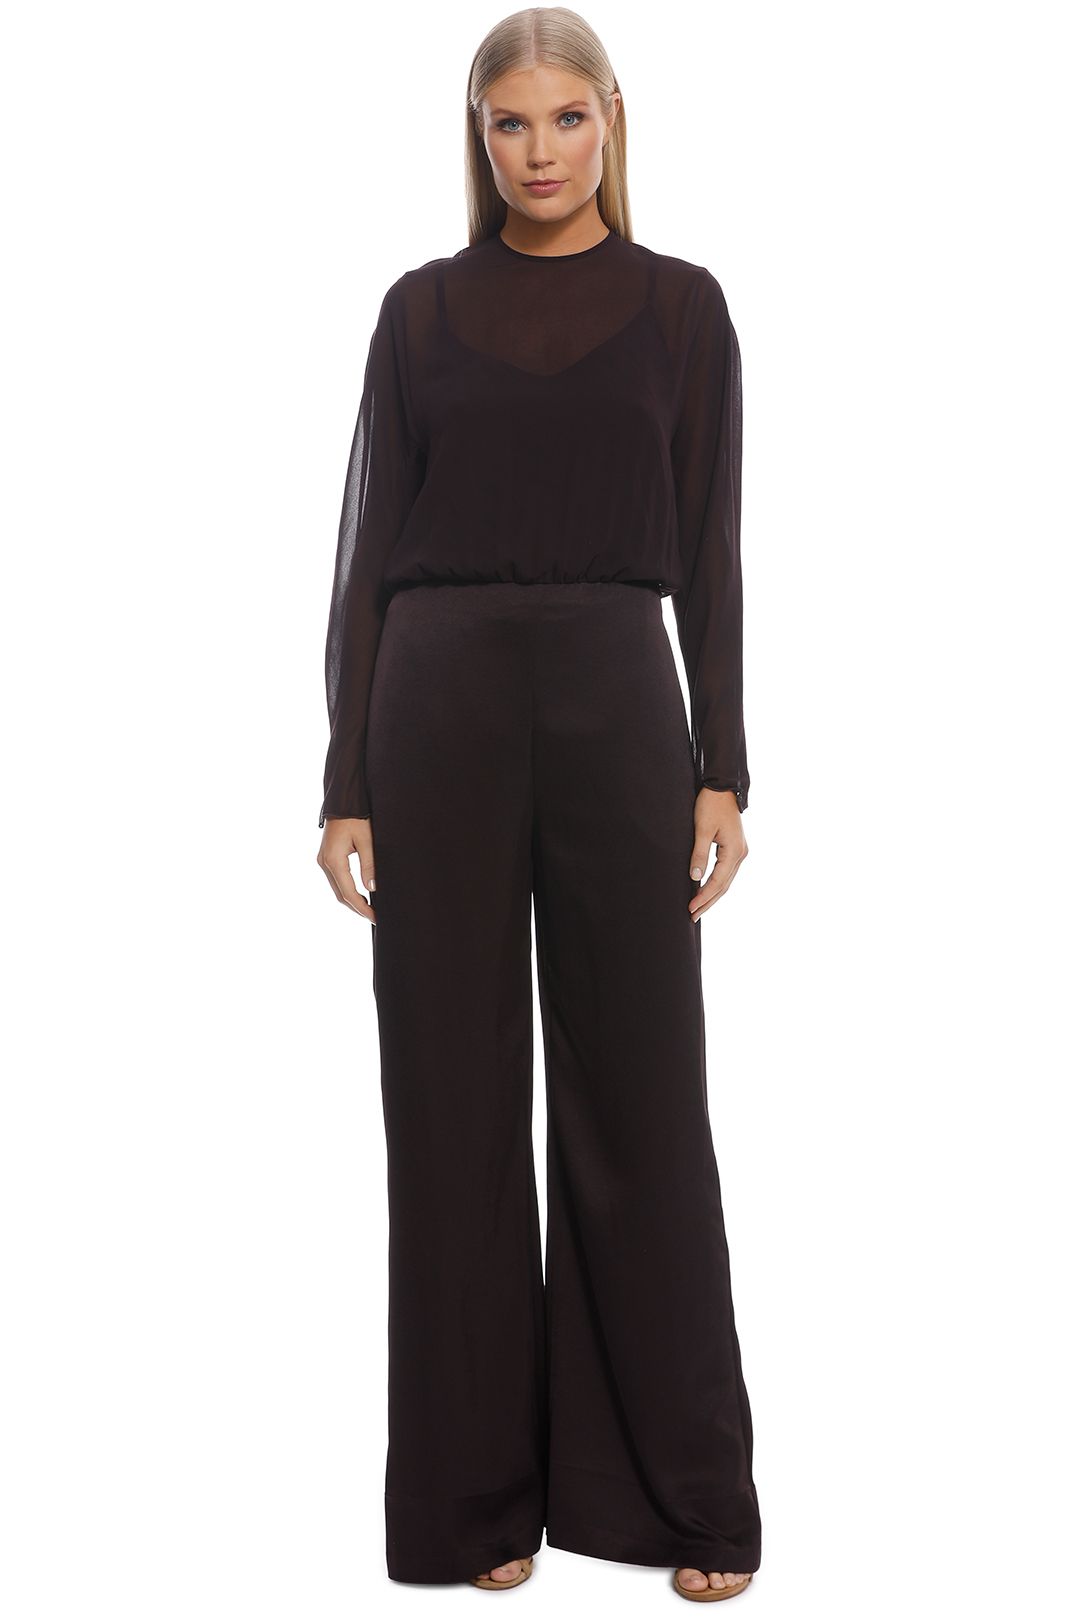 Henderson Jumpsuit by Camilla and Marc for Hire